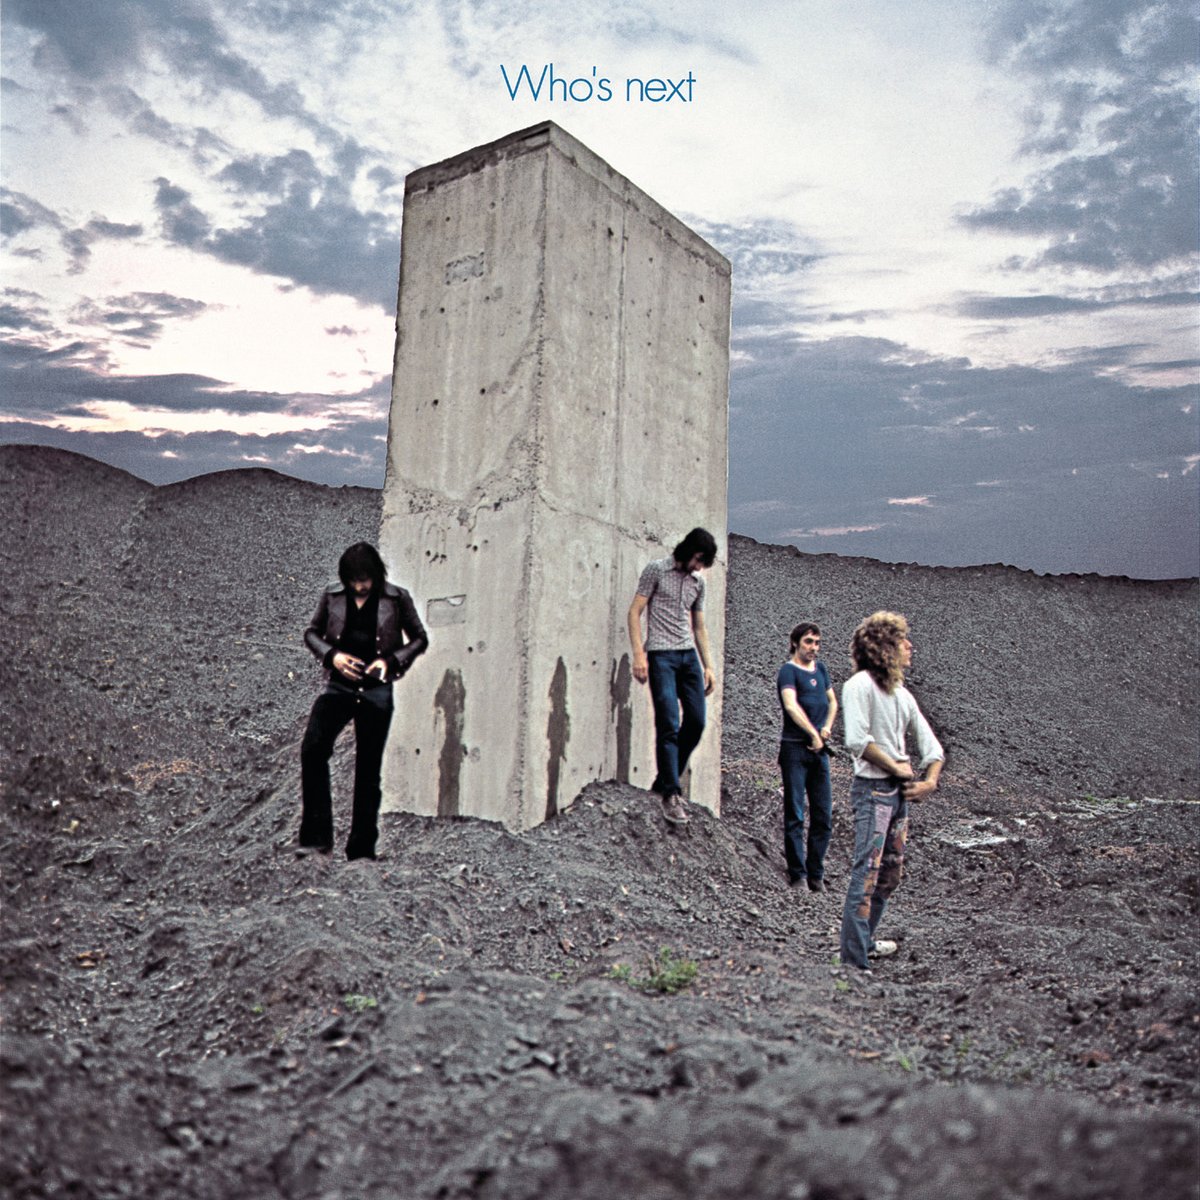 My remix of what for many is the greatest rock album ever made (and who am I to disagree?), Who’s Next by @TheWho is released as part of a lavish box set by Universal on 15th September. Pre-order here: thewho.lnk.to/WhosNext